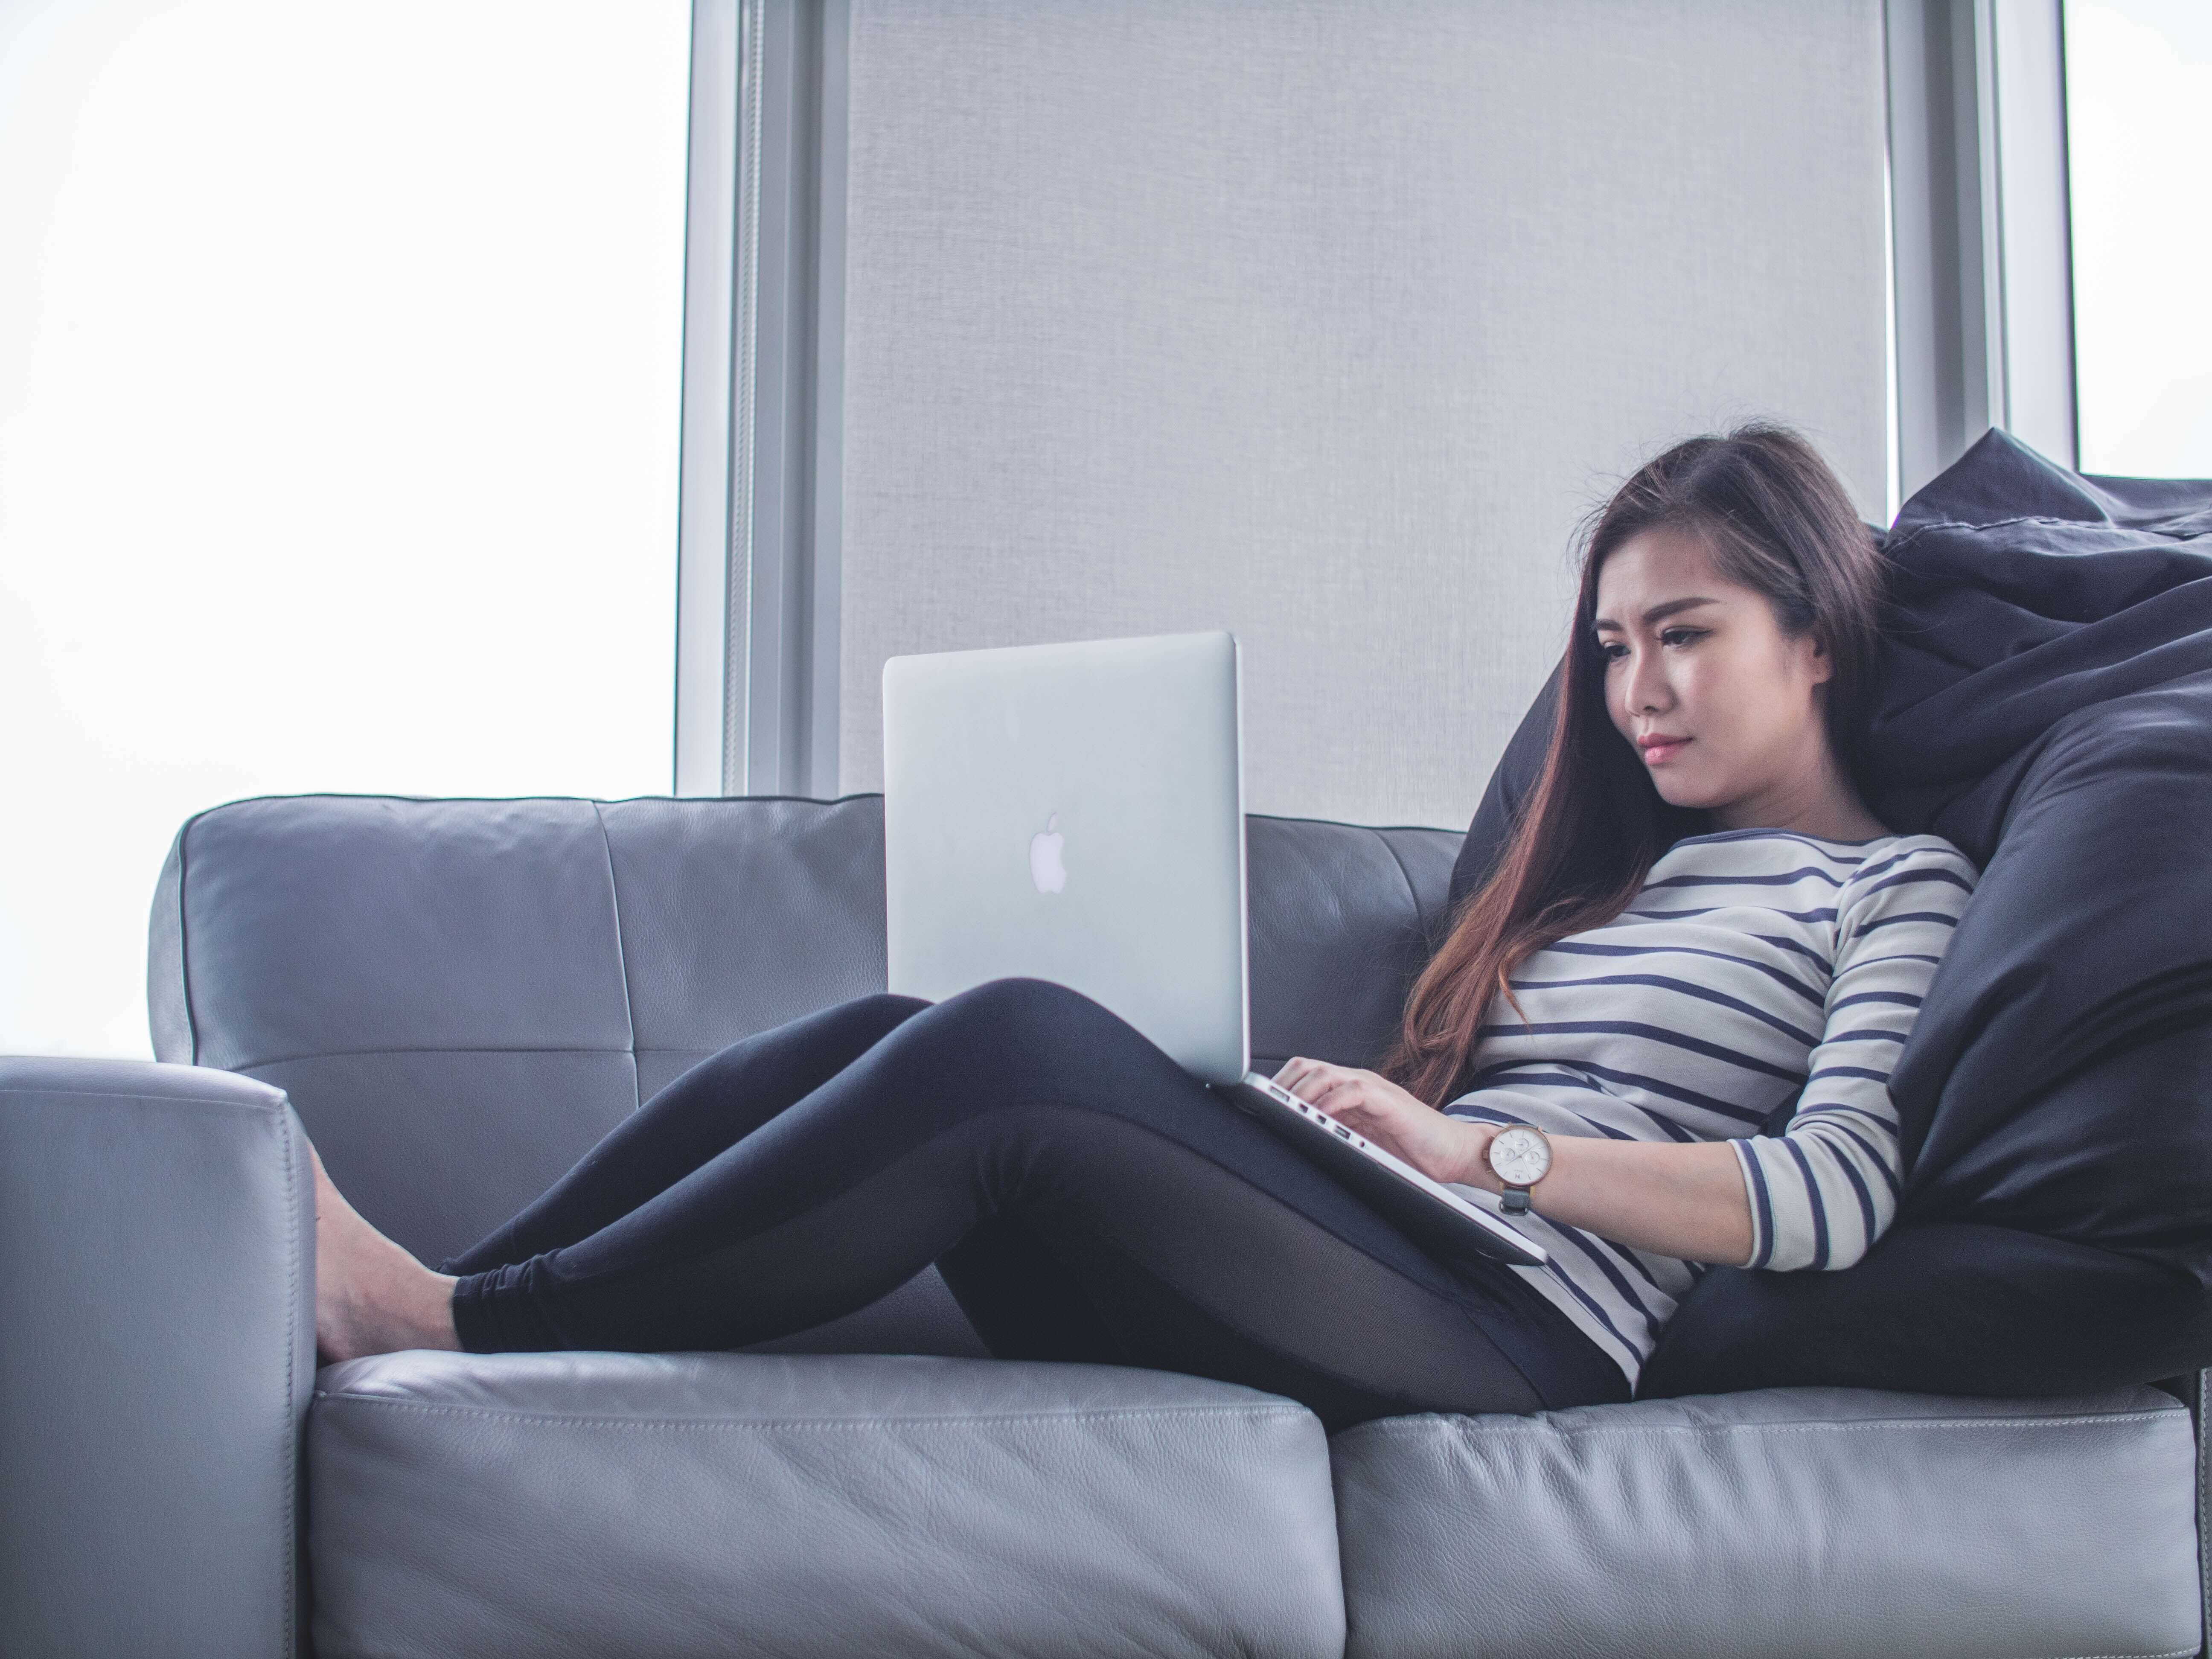 An East Asian woman in athleisure clothing  uses a computer while sitting on a grey leather couch